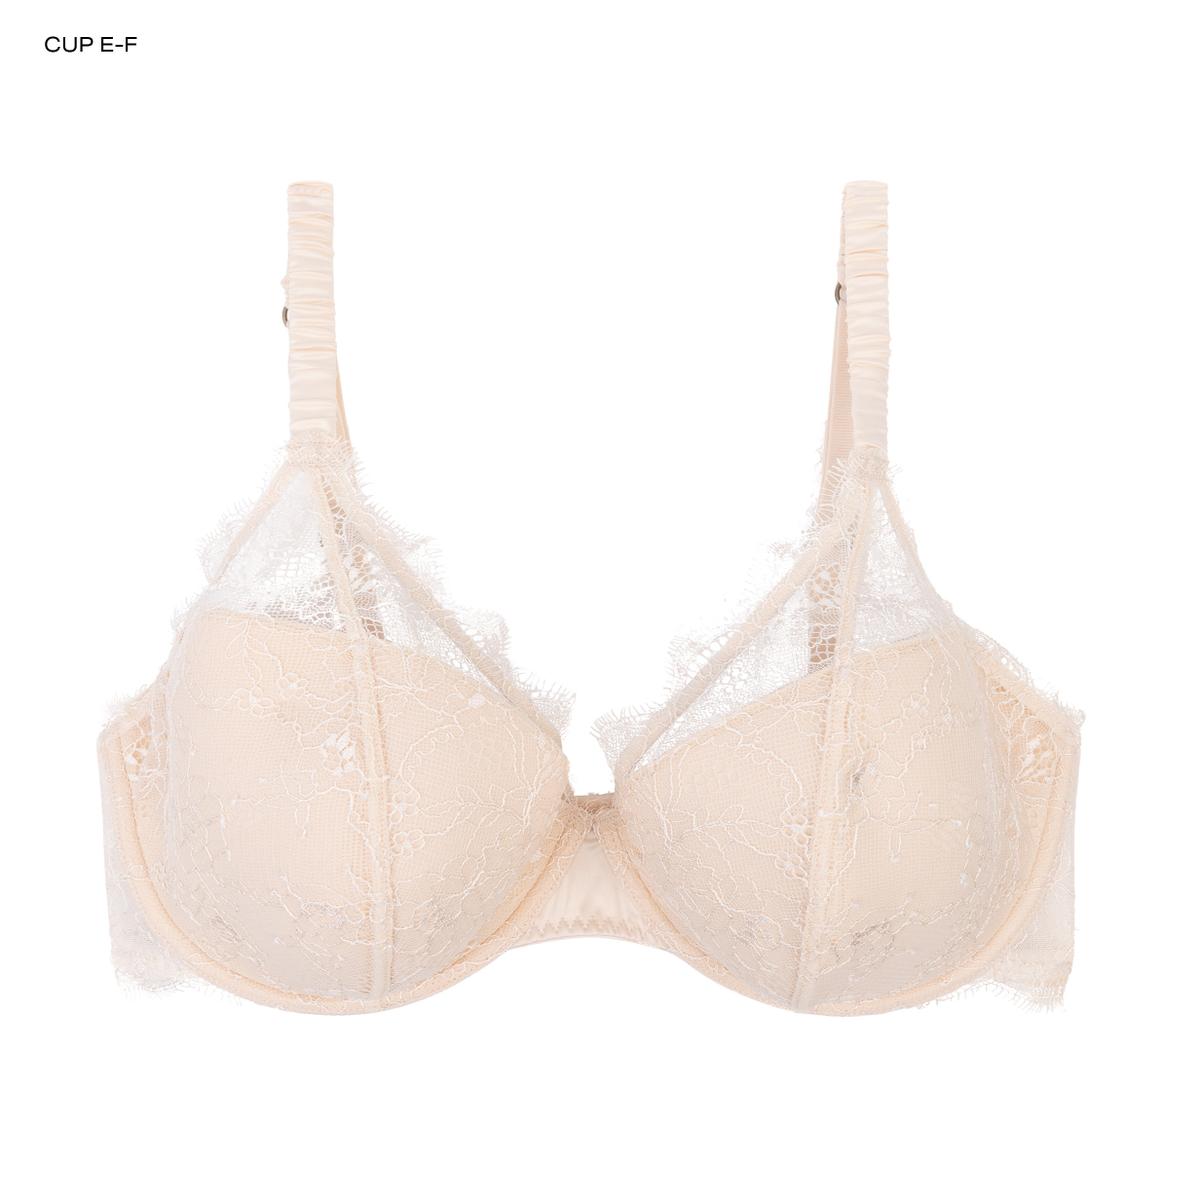 Collection Love Story, Love Story - Molded light padded cup bra